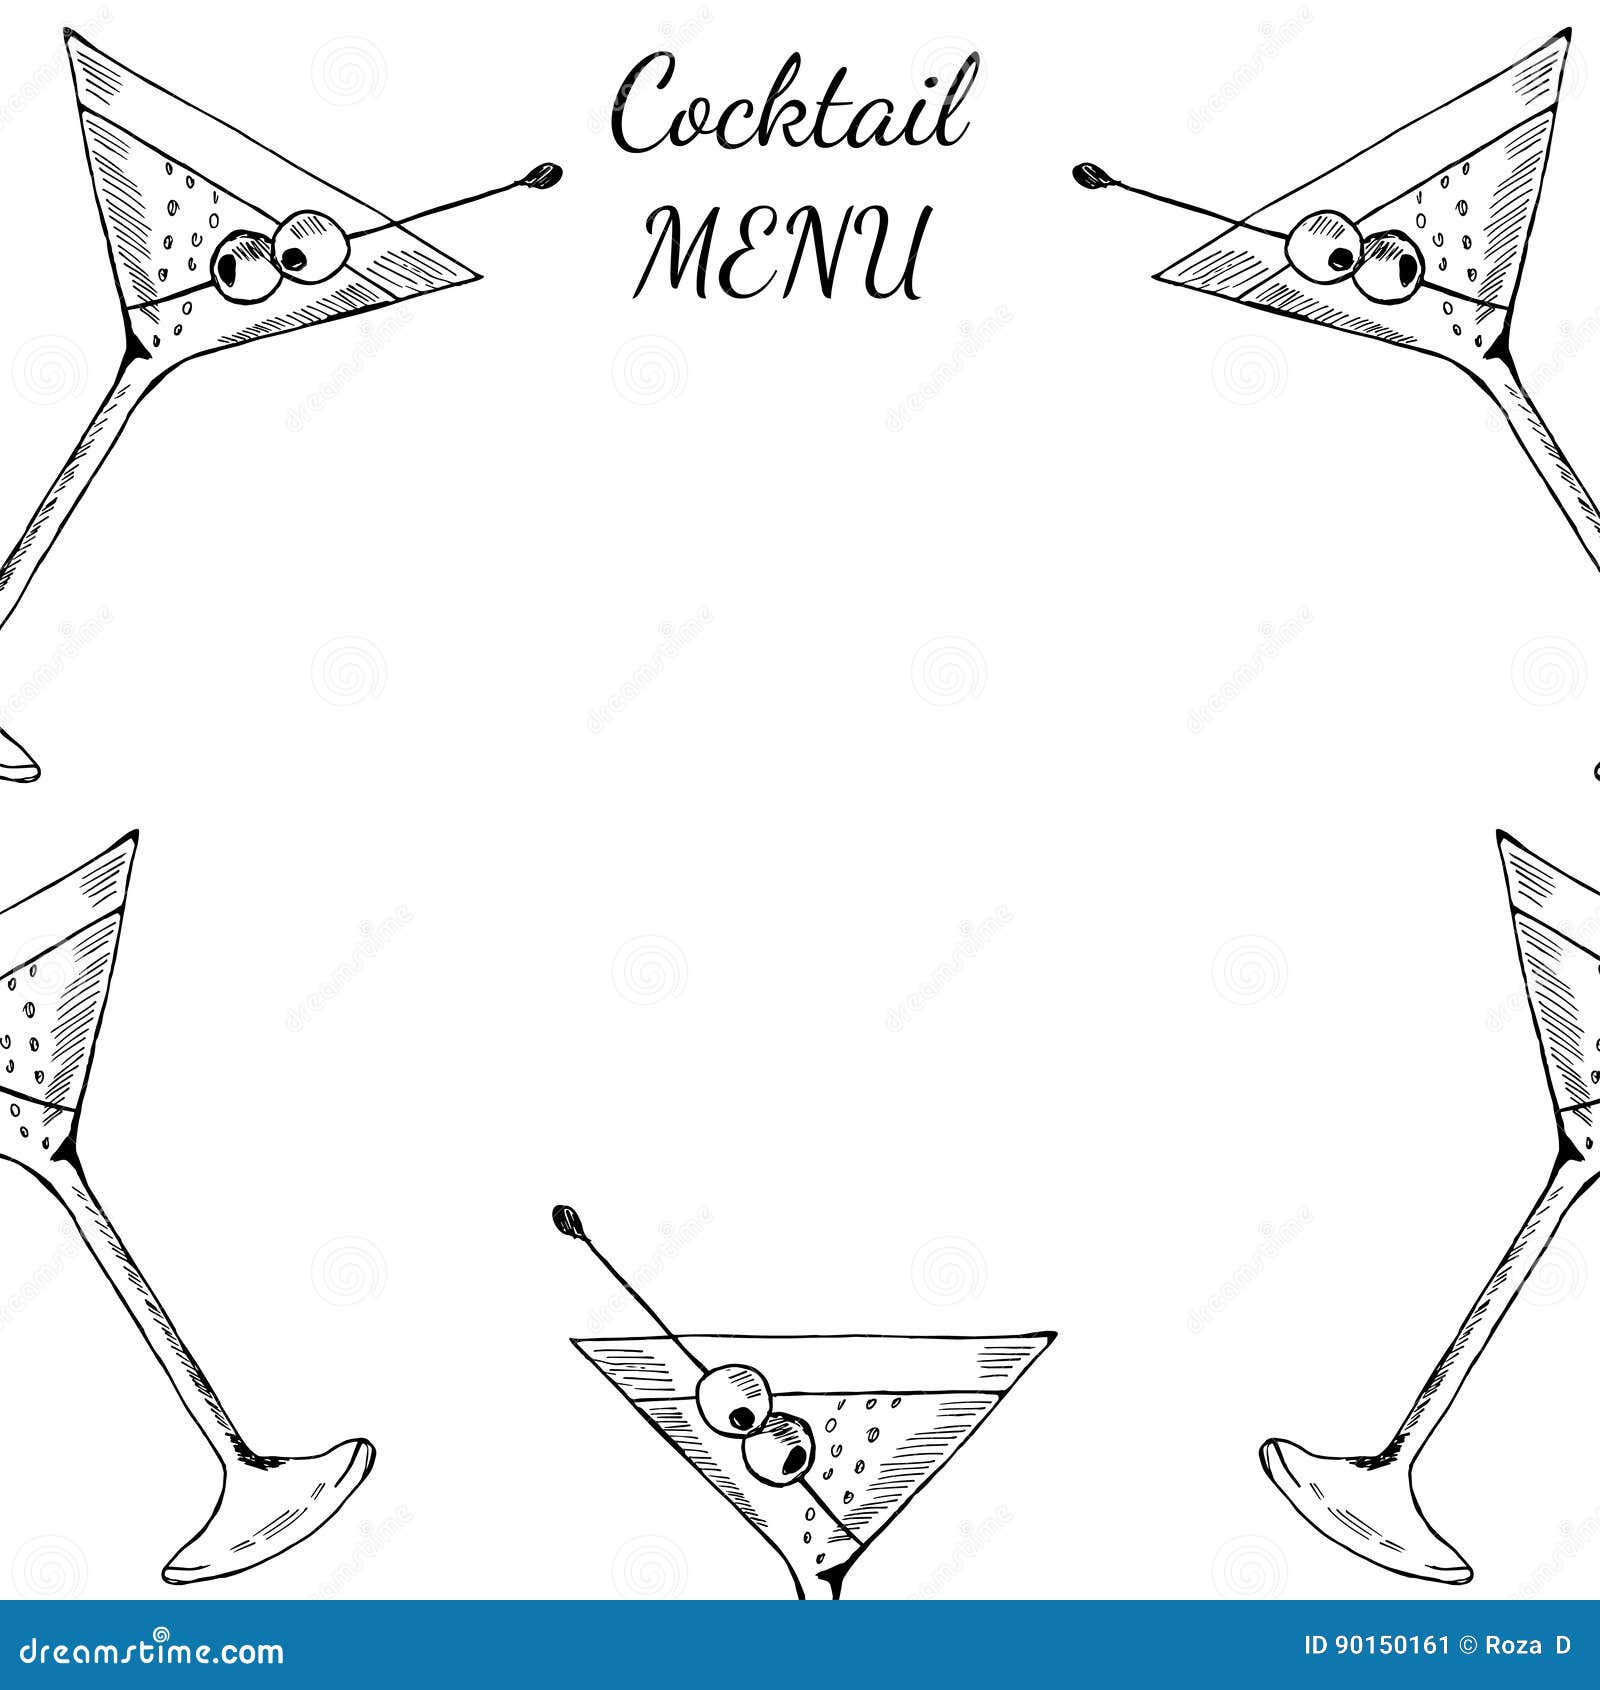 Martini, Cocktails menu stock vector. Illustration of cocktails With Cocktail Menu Template Word Free